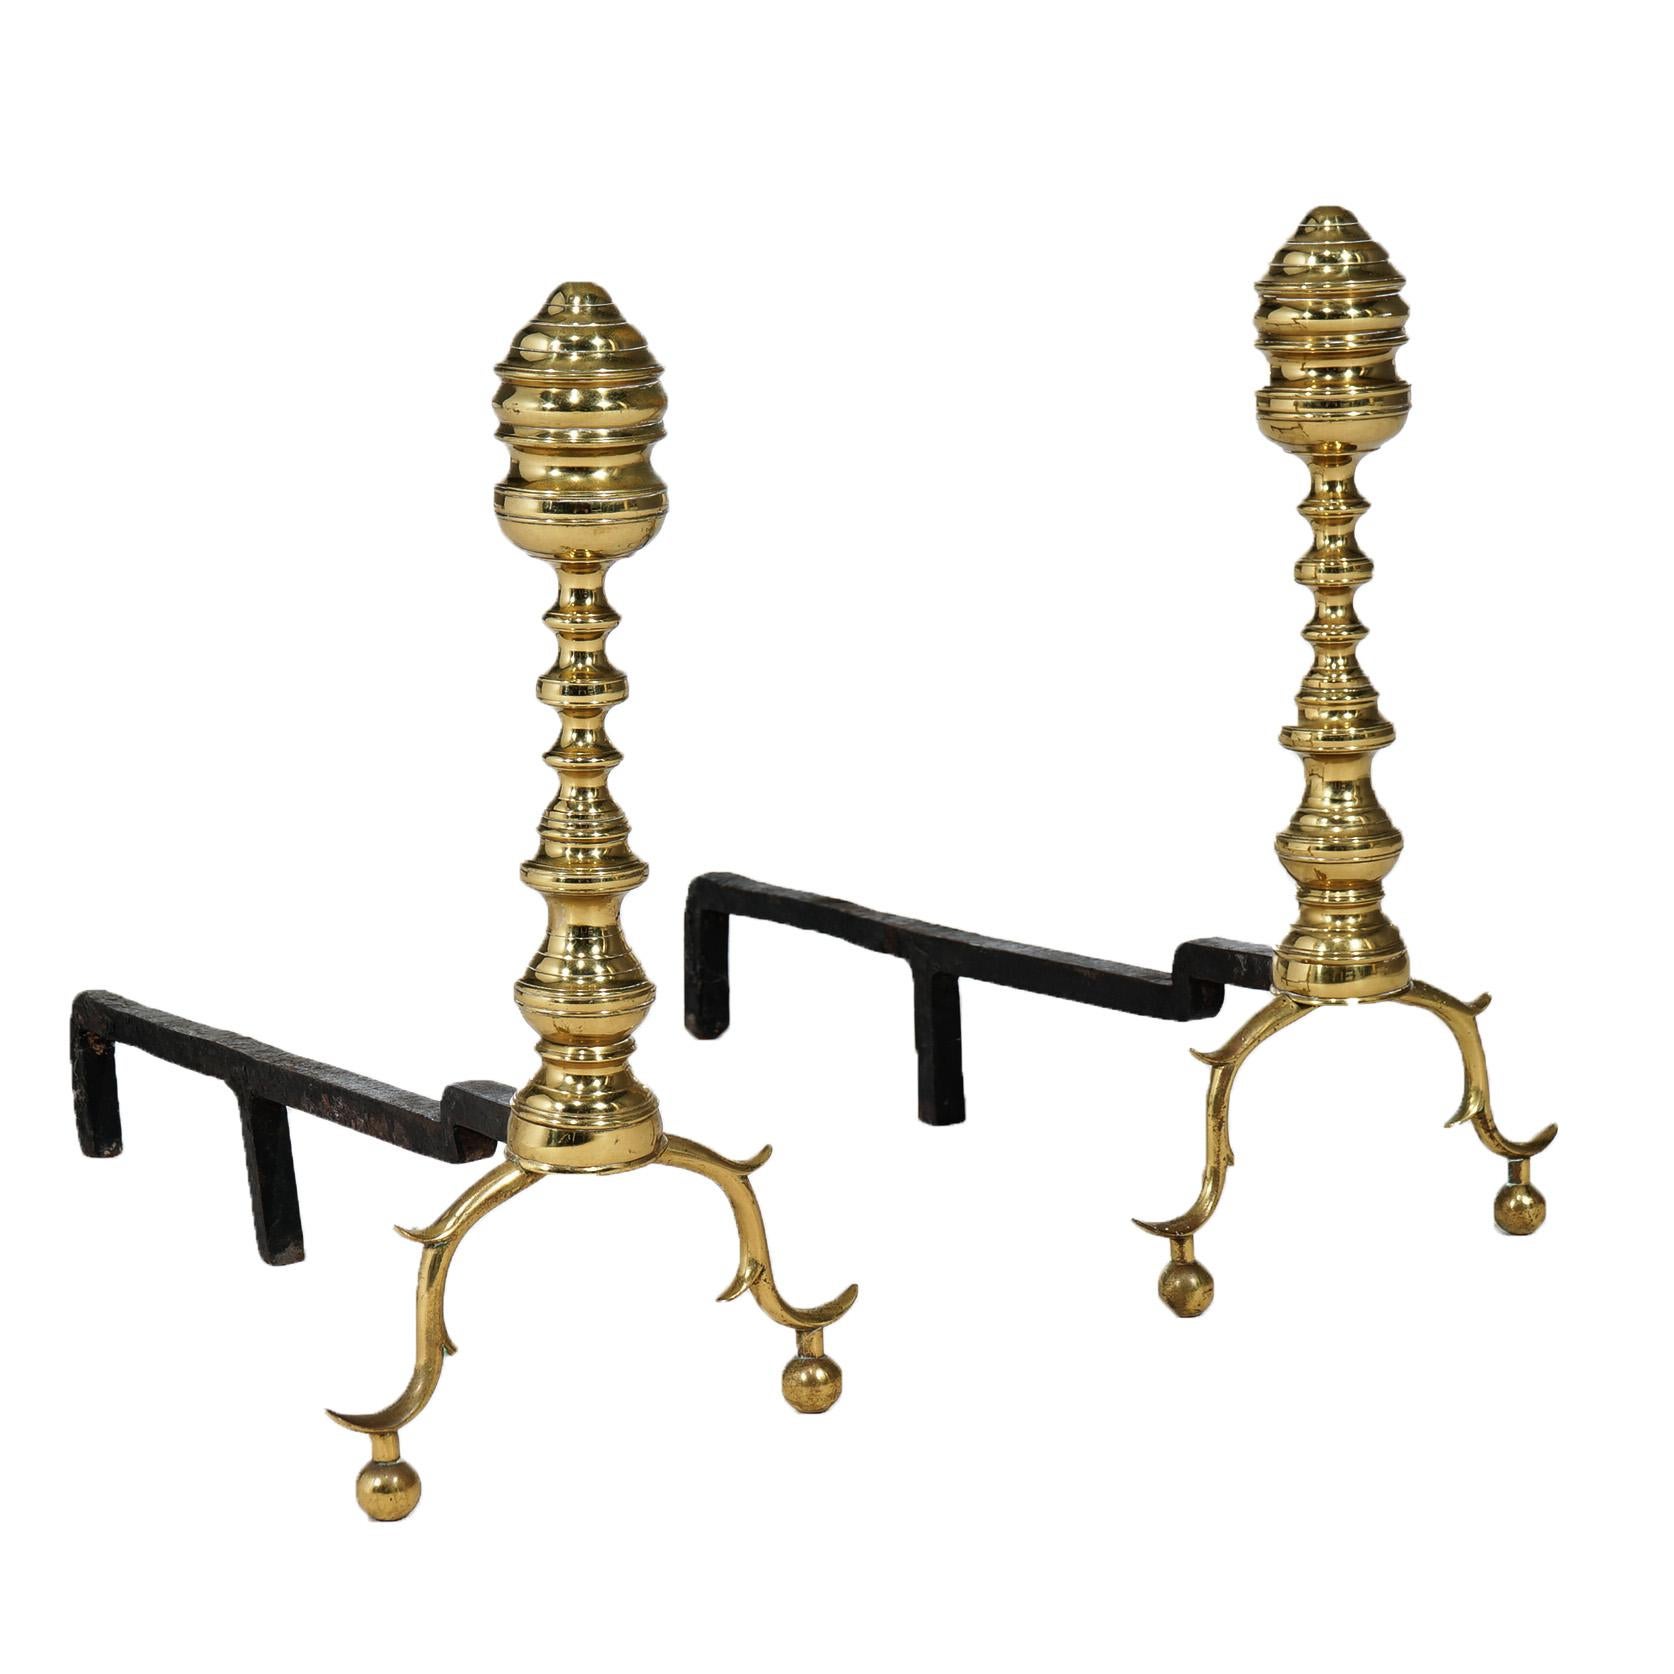 An antique set of English Chippendale style fireplace andirons offers brass construction in balustrade form having beehive finials and raised on scroll form legs with ball feet, 20th century

Measure - 19